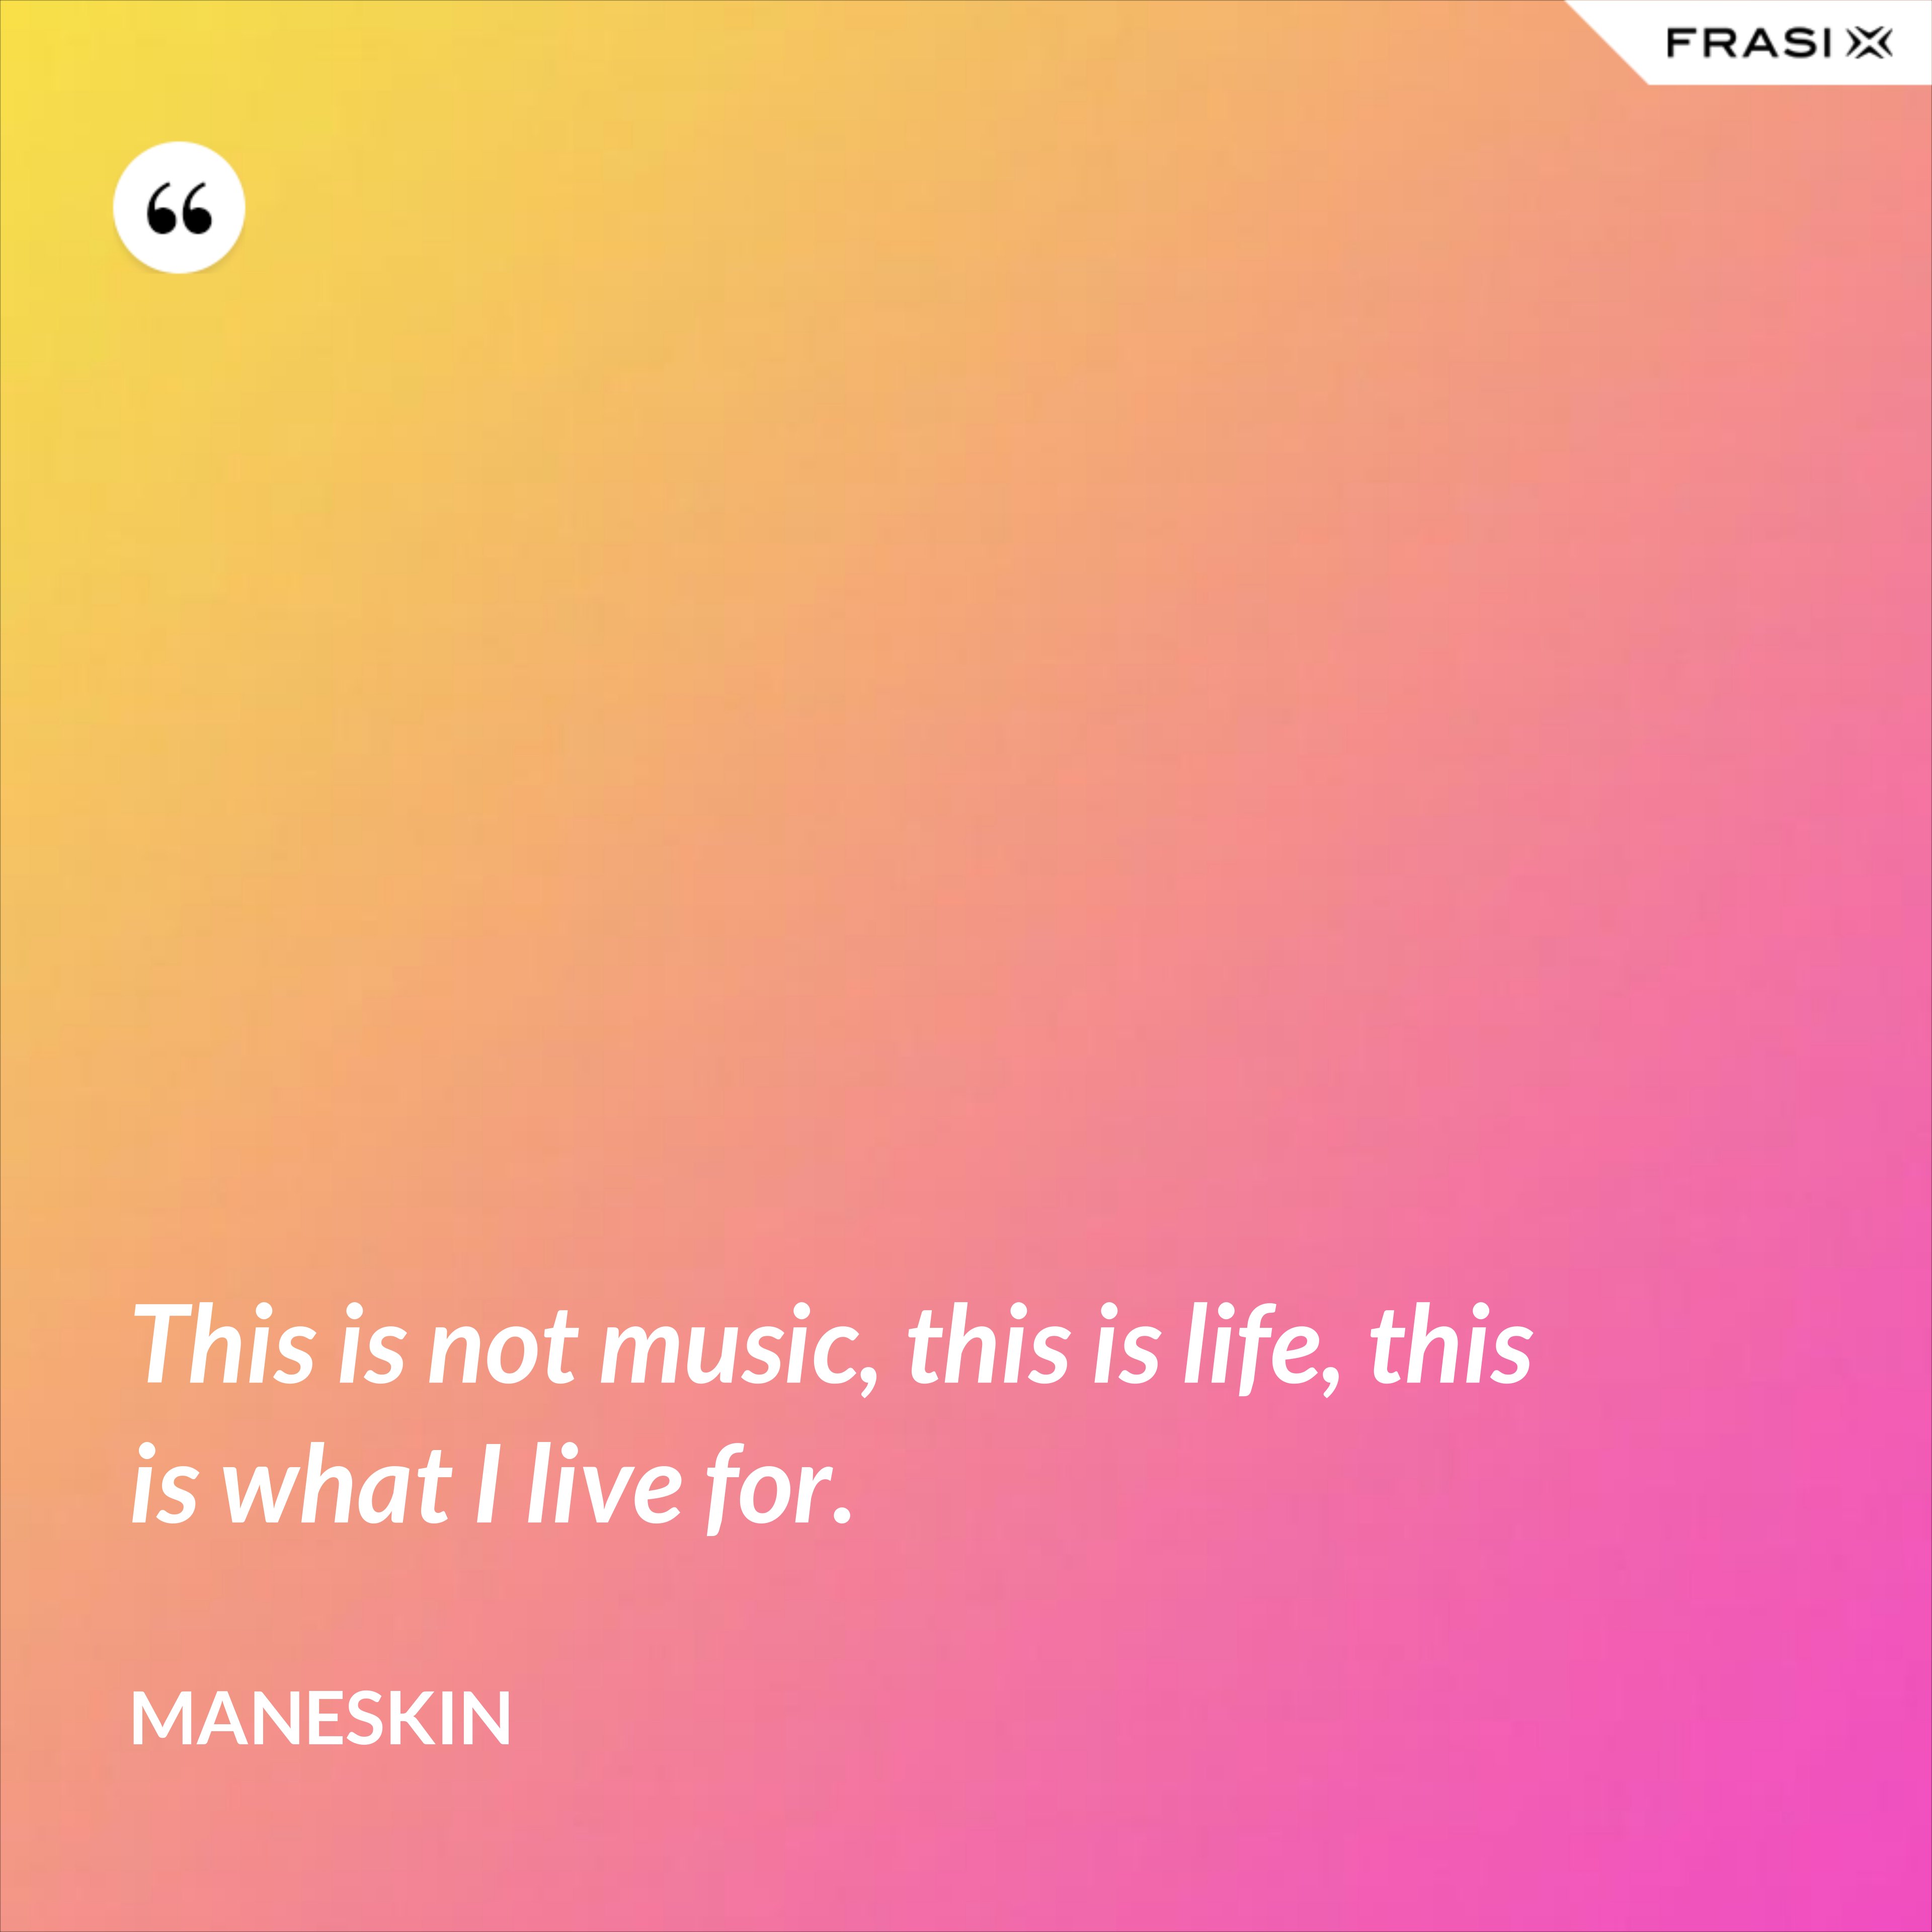 This is not music, this is life, this is what I live for. - Maneskin